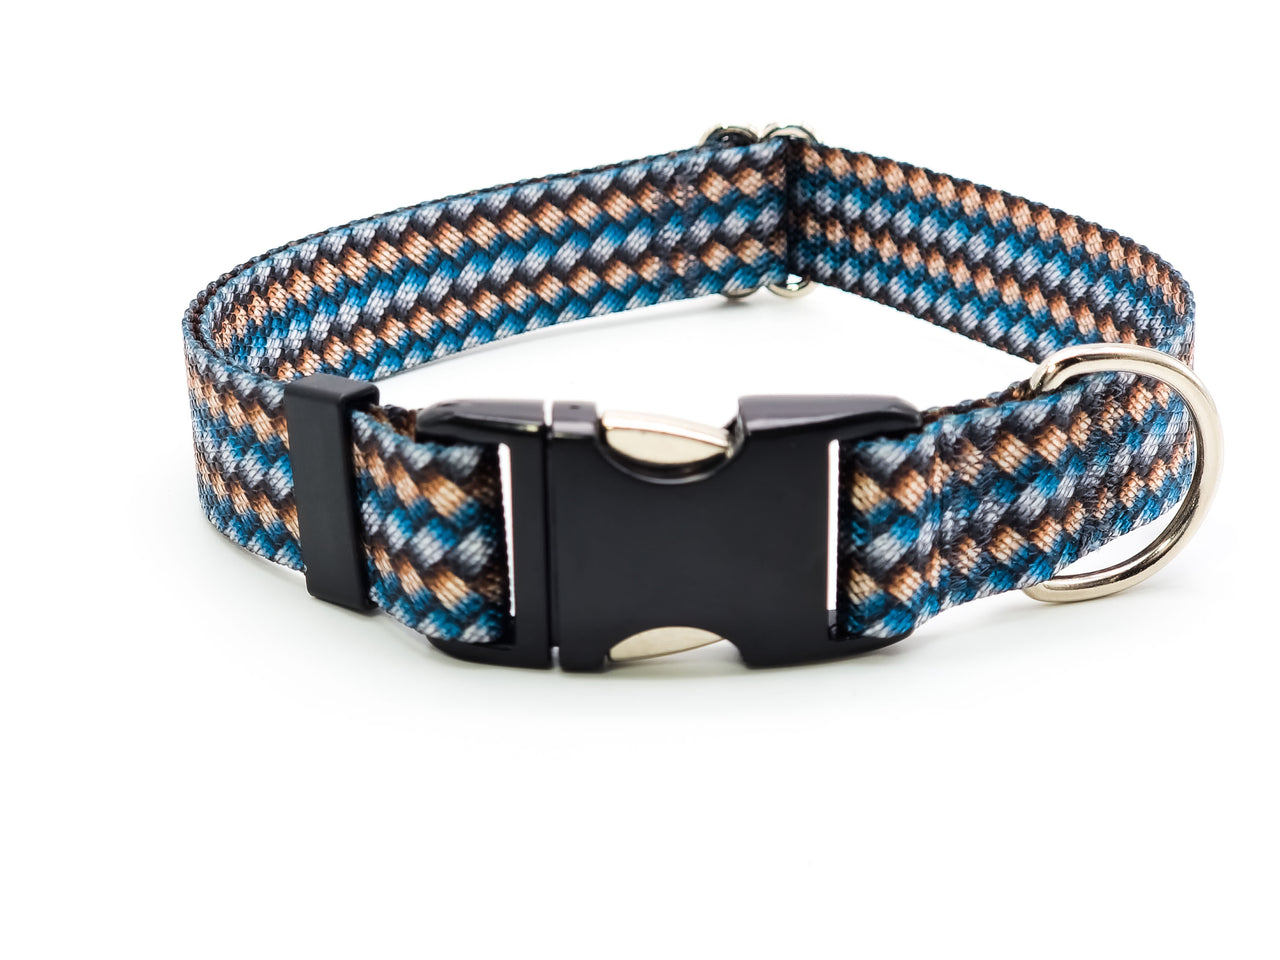 Woven Metal | Flat Side Release Collar | Large 14"-23" in 1" wide